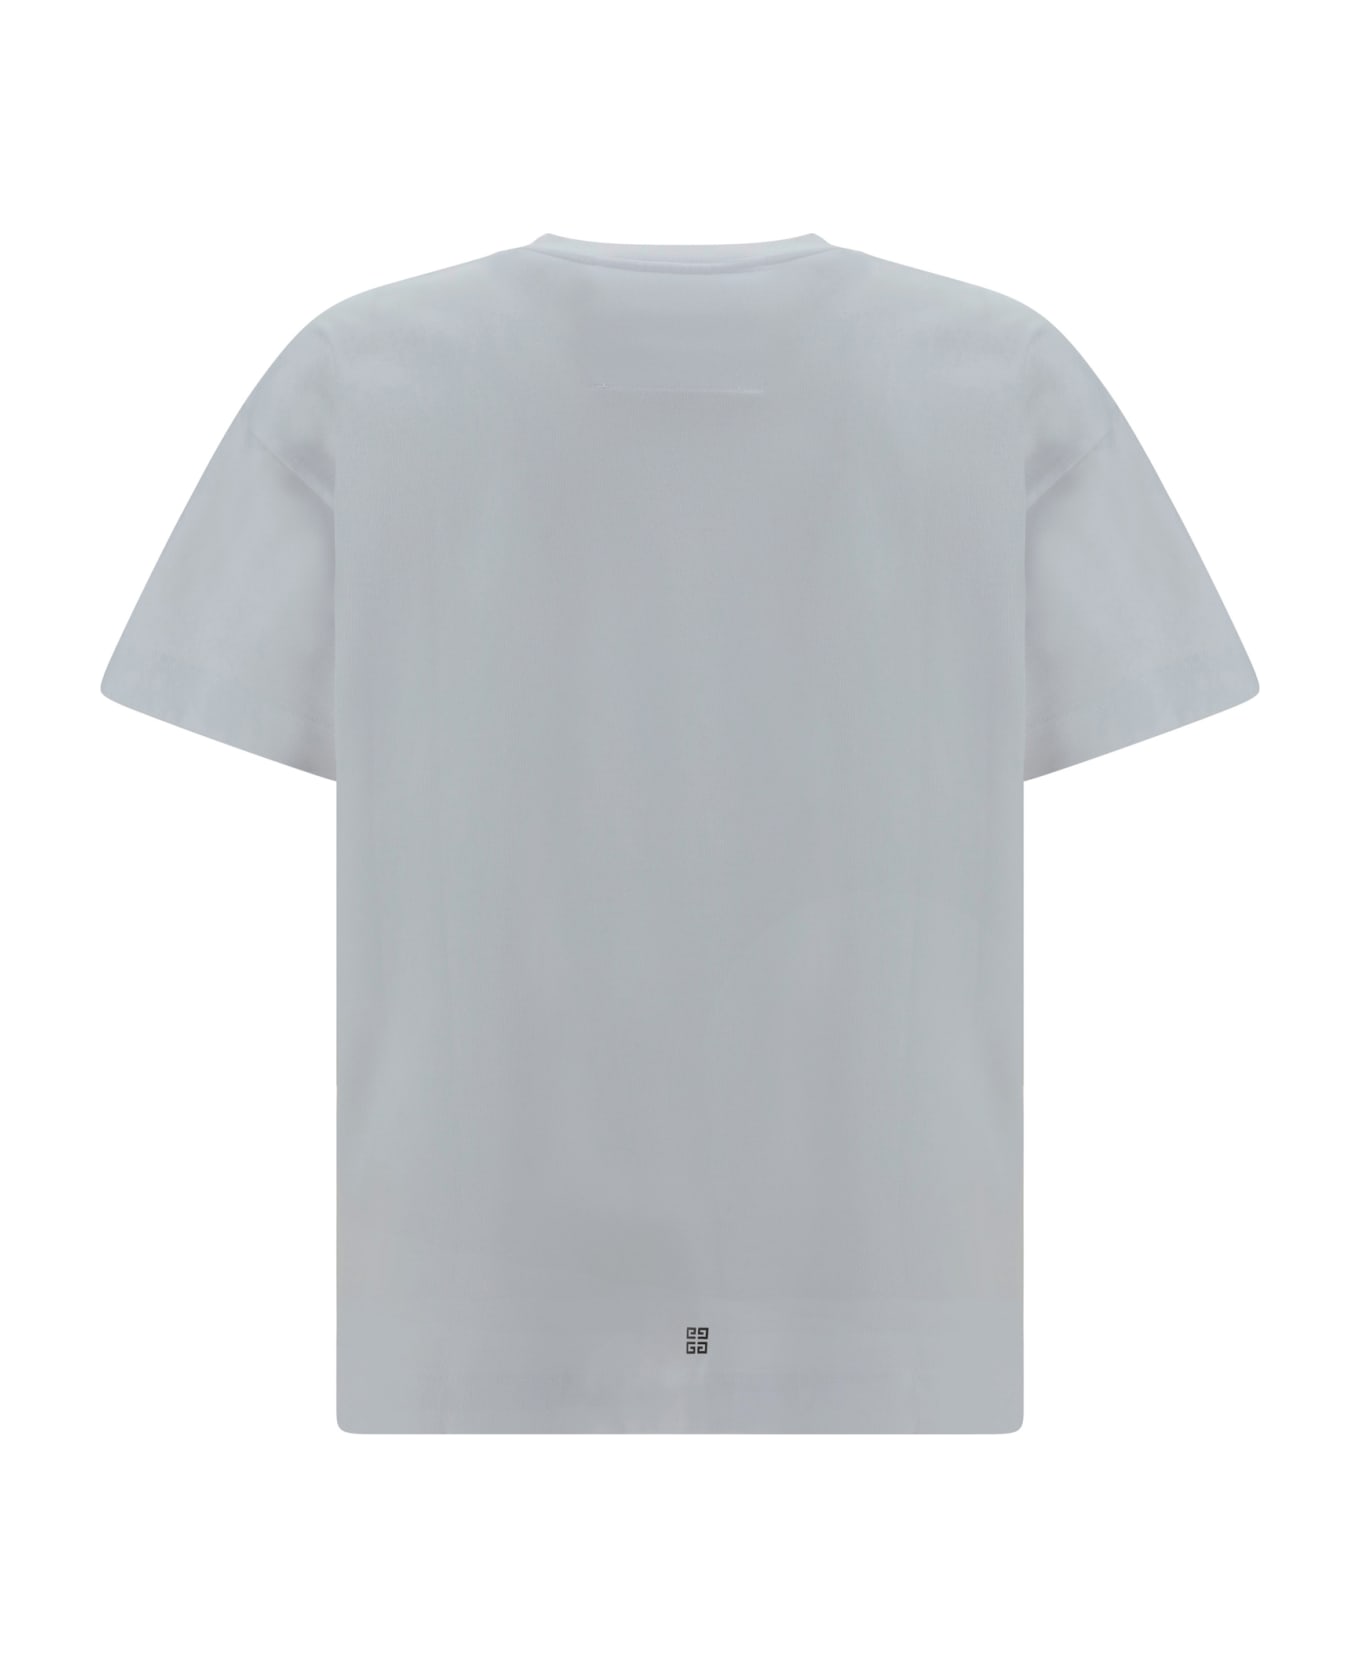 Givenchy Graphic Printed Crewneck T-shirt - White